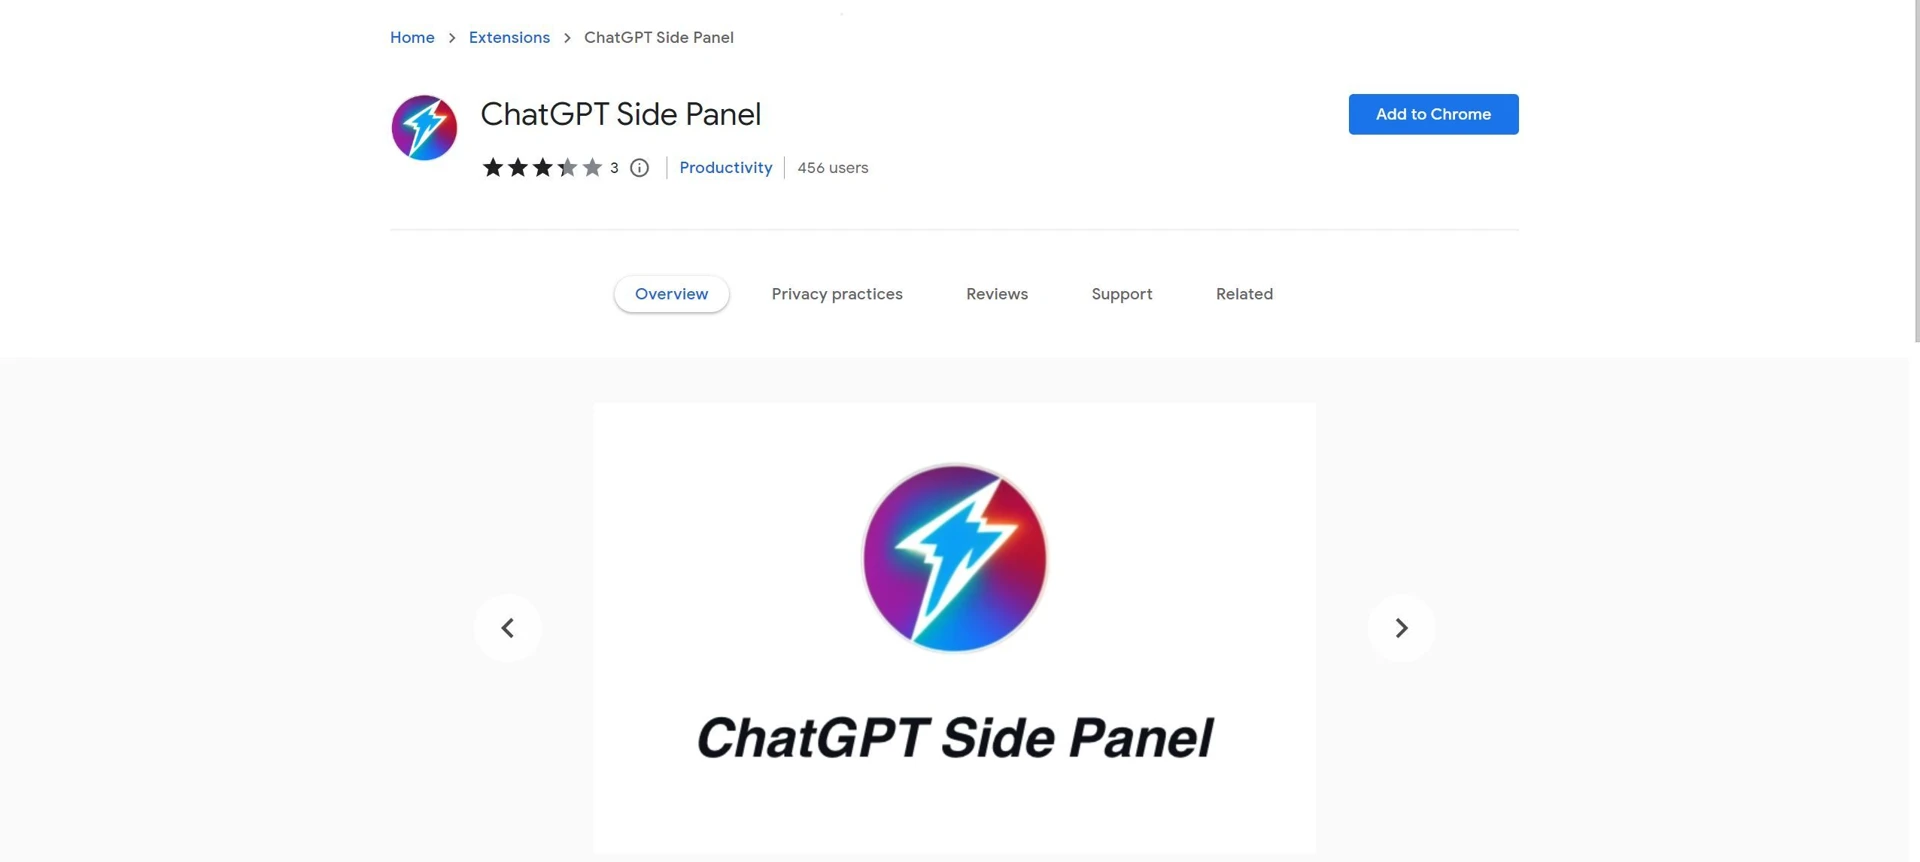 ChatGPT Side Panelwebsite picture